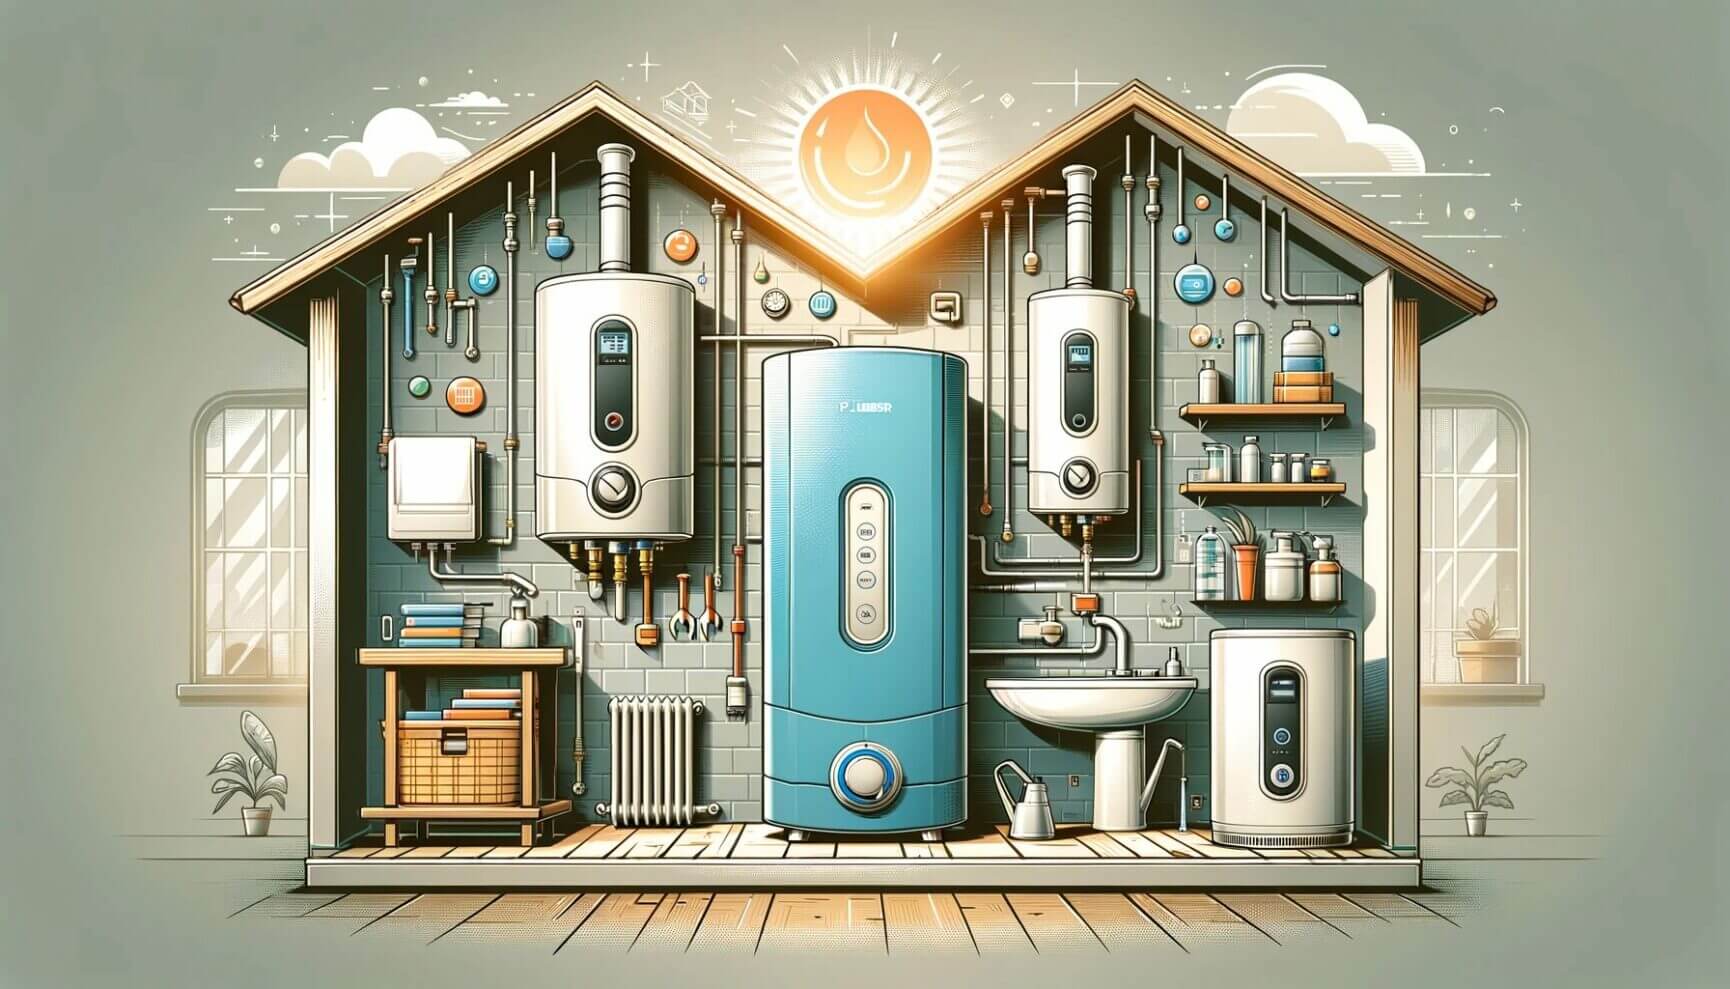 An illustration of a house with a water heater and other appliances.